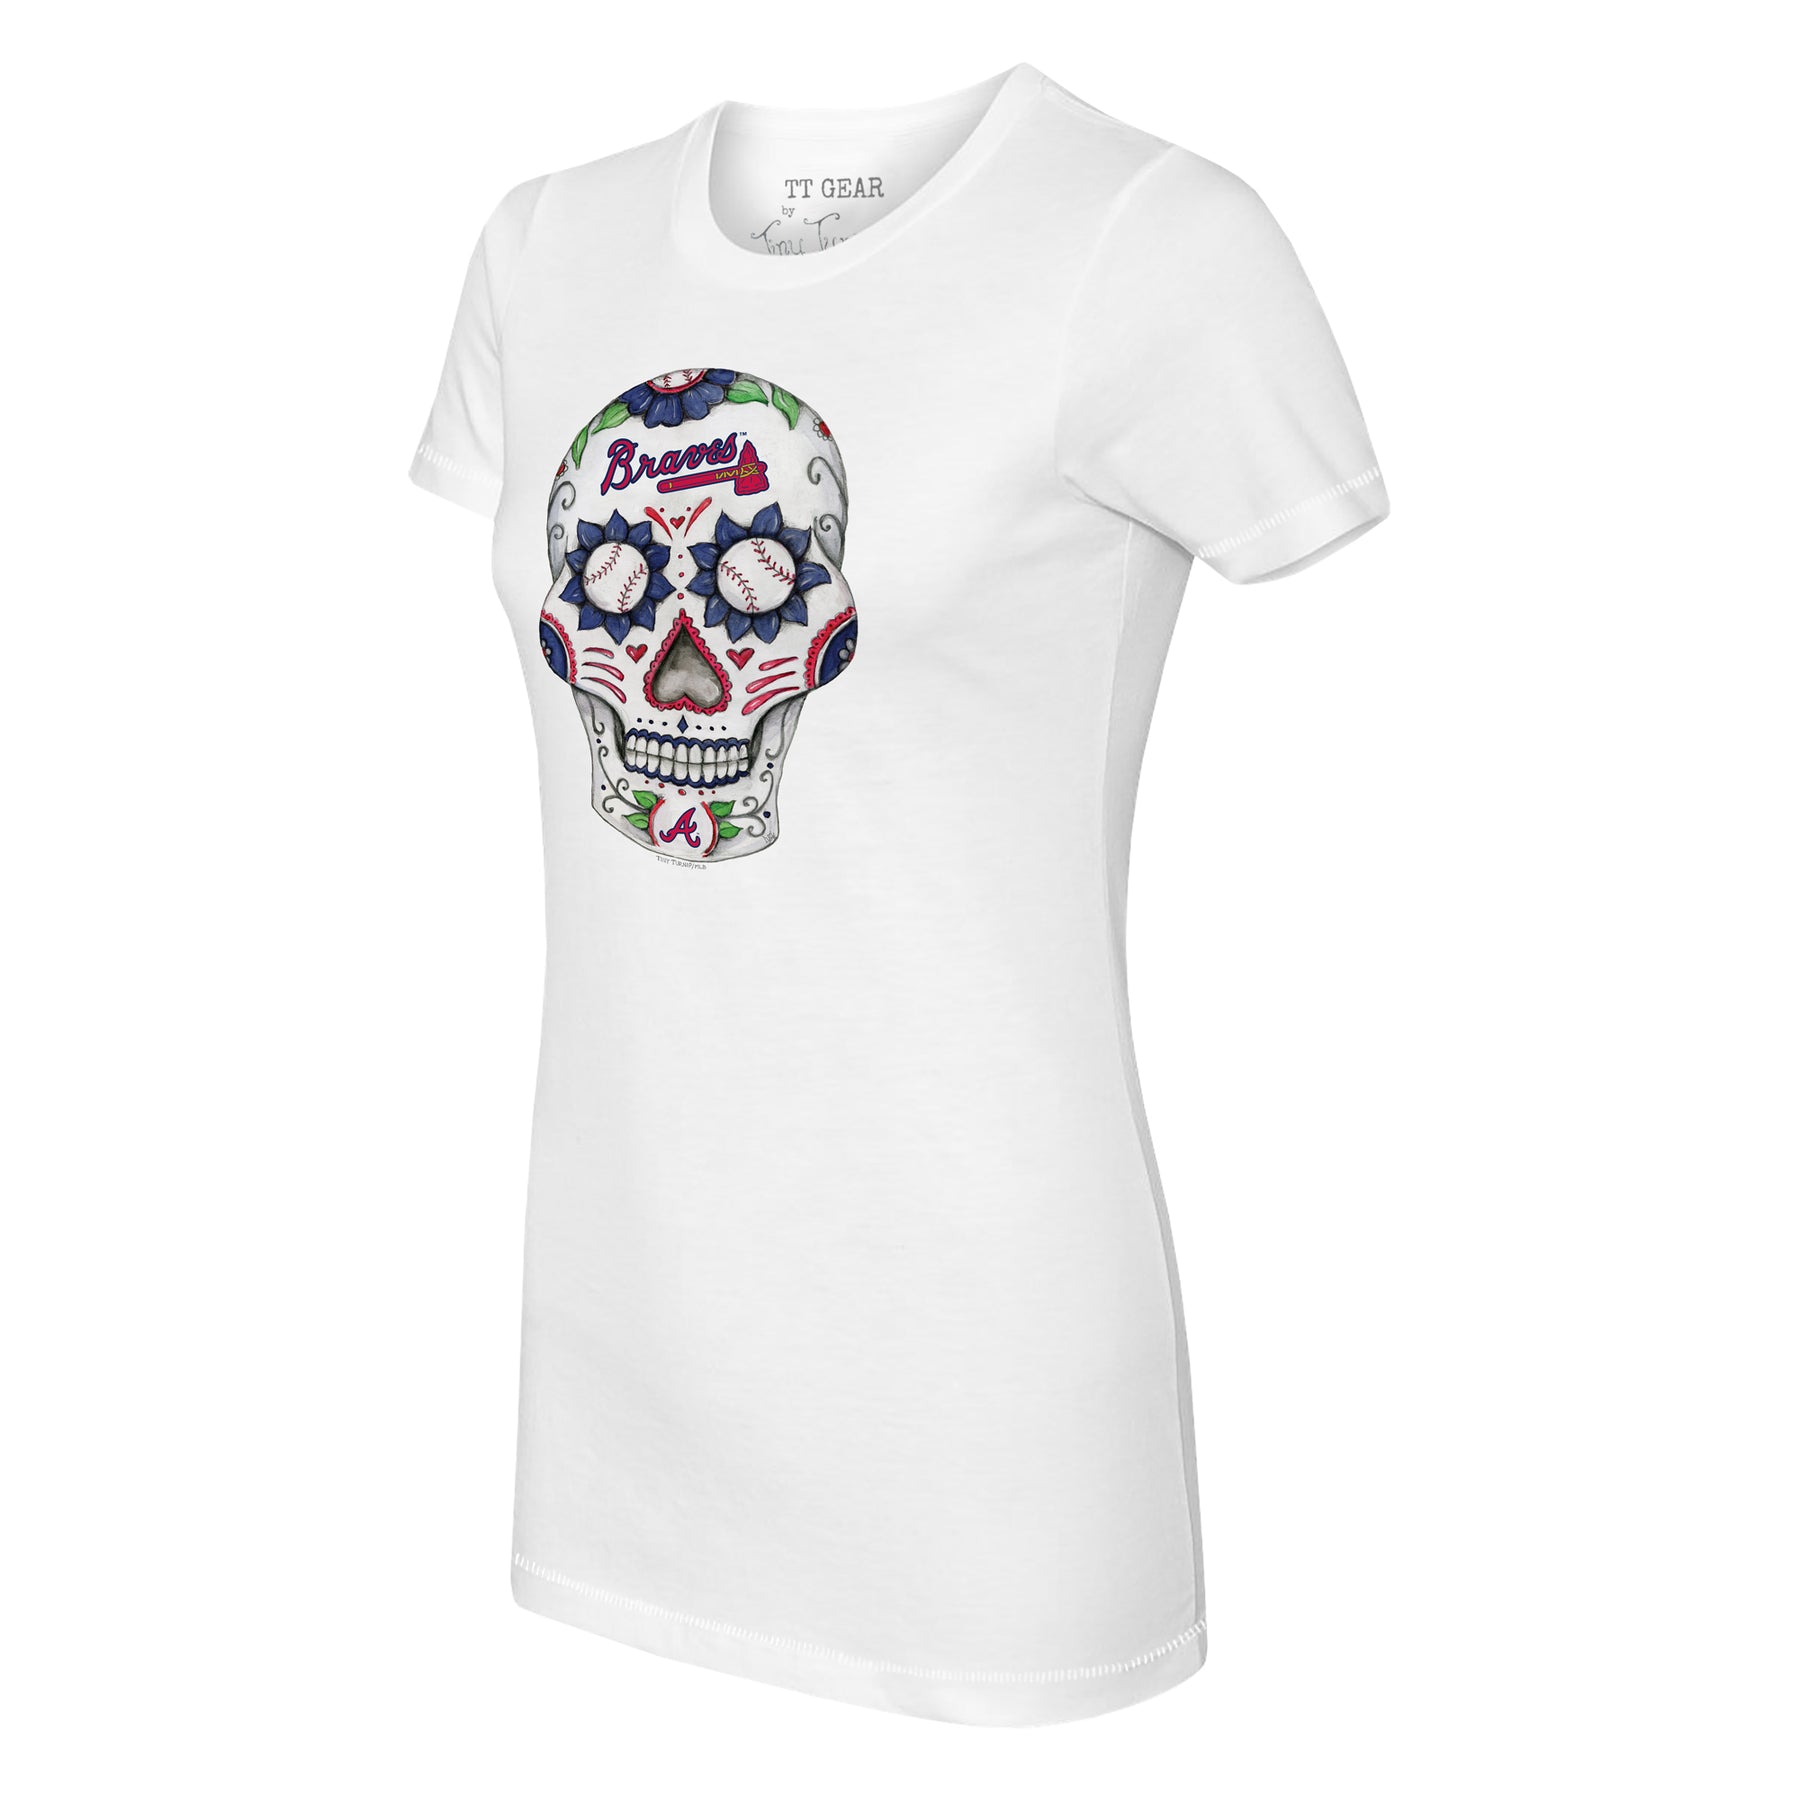 Braves Retail on X: 2019 @LosBravos Sugar Skull tees are now available!  PLUS-spend $75 before tax on Los Bravos merchandise & receive a FREE  Sugar Skull poster! While supplies last. In store